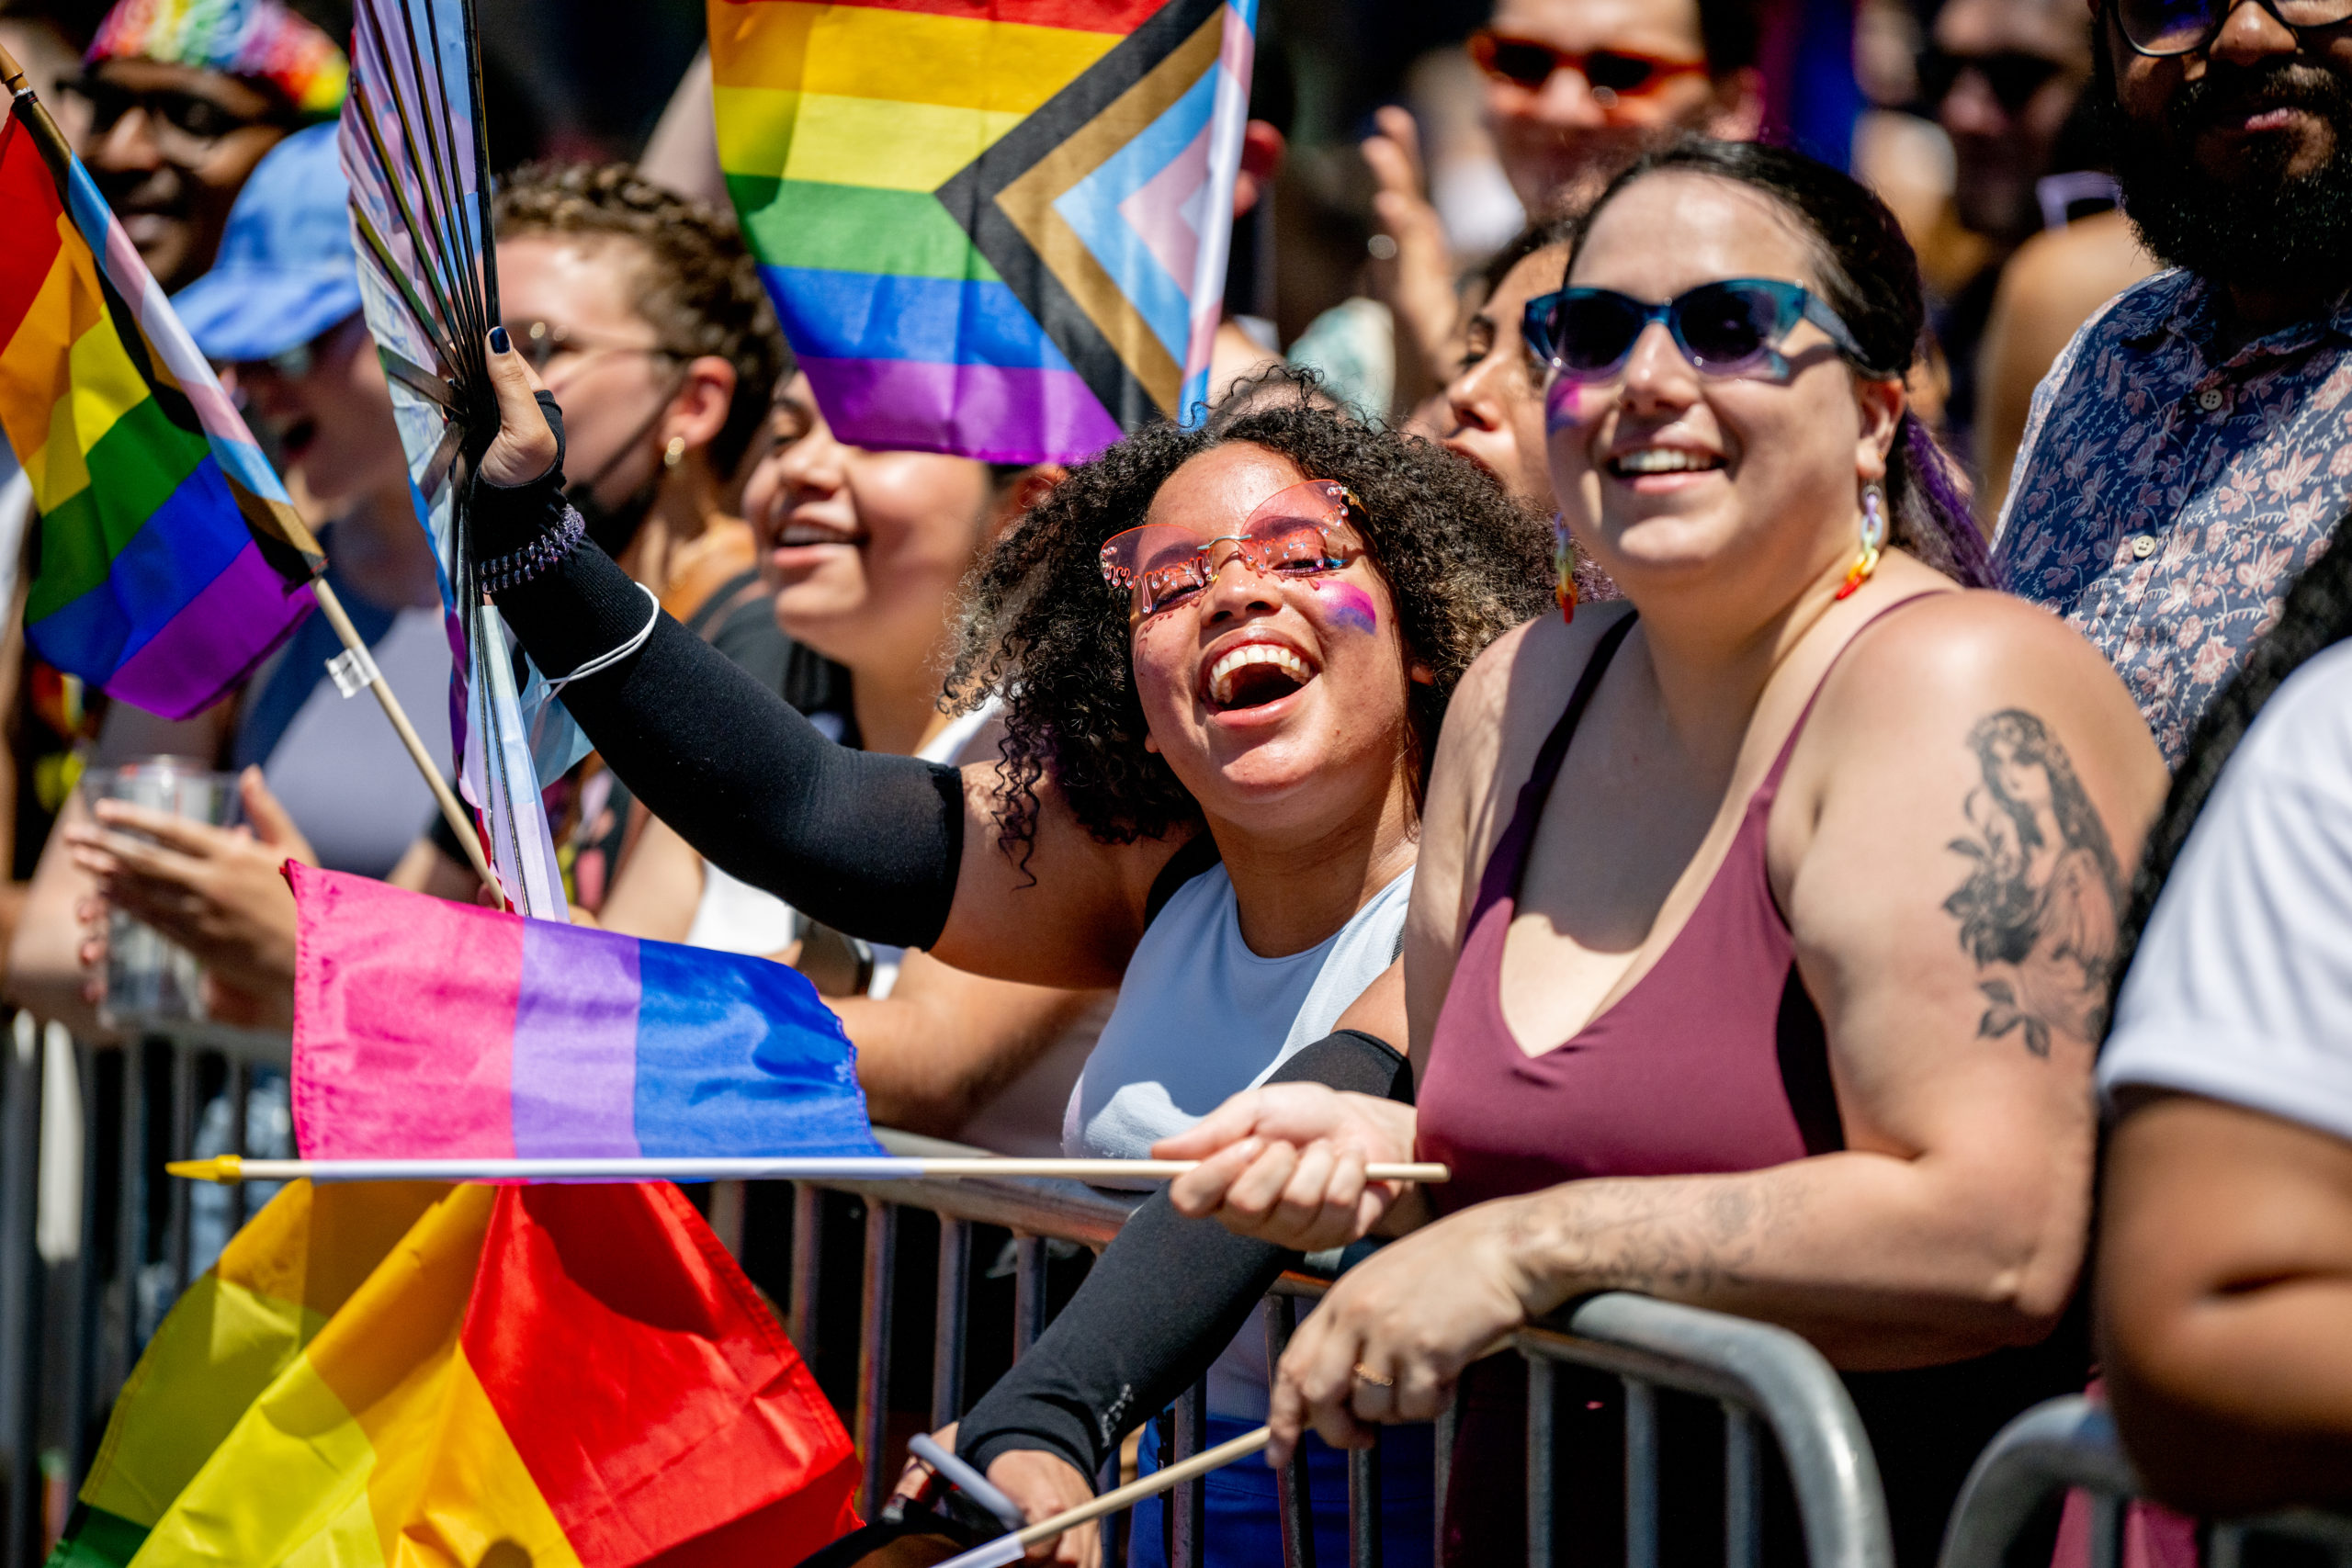 People in Pride colors attend and march during the 2022 New York City Pride March on June 26, 2022 in New York City. (Photo by Roy Rochlin/Getty Images)